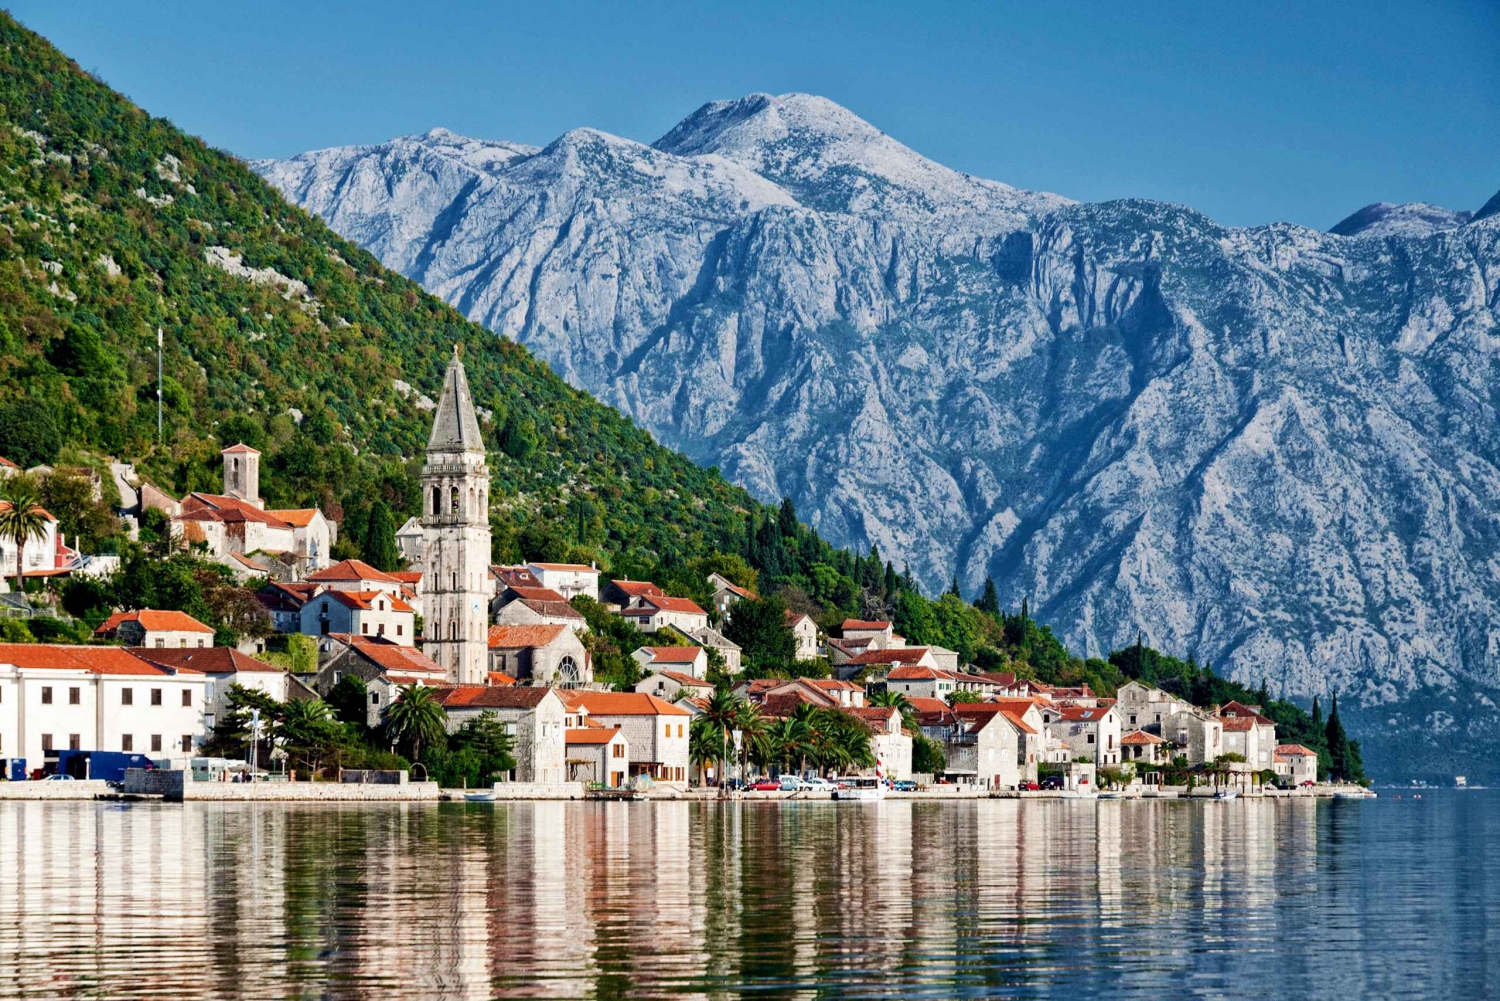 Private Day Tour of Budva and Kotor, Montenegro from Tirana